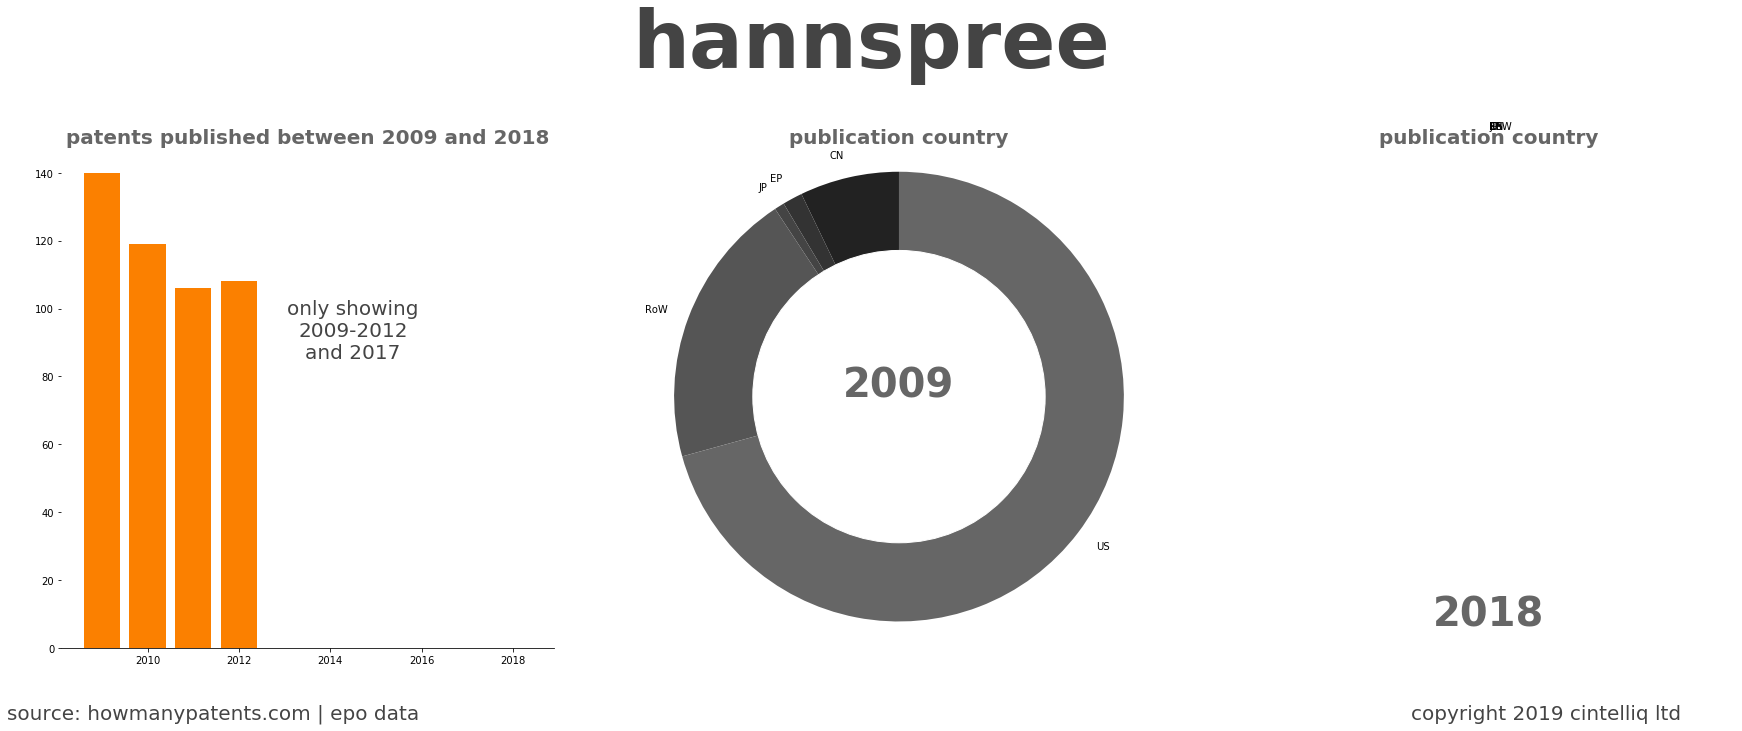 summary of patents for Hannspree